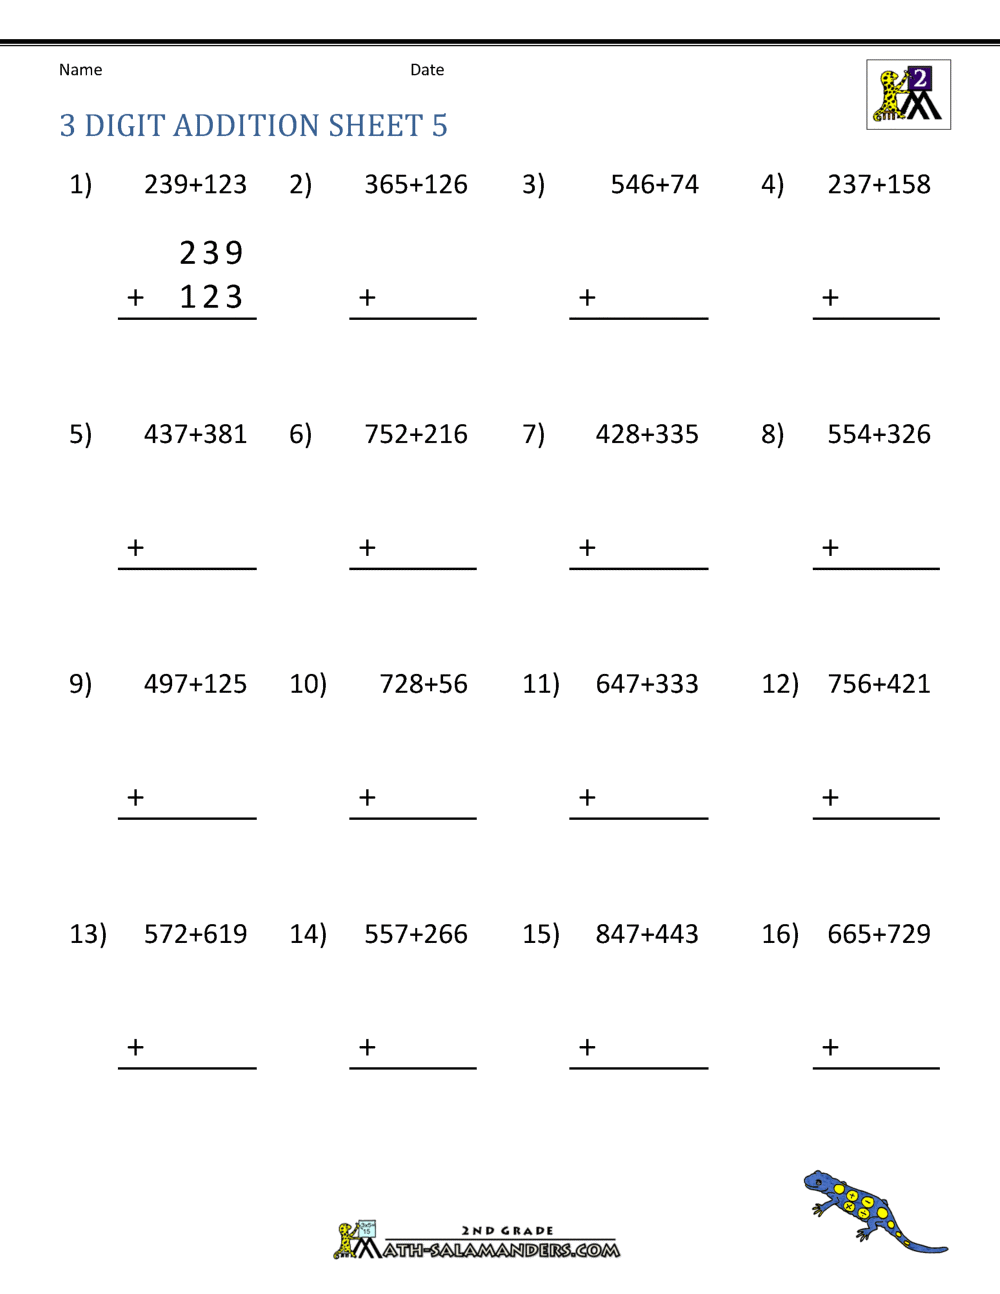 3 digit addition regrouping worksheets